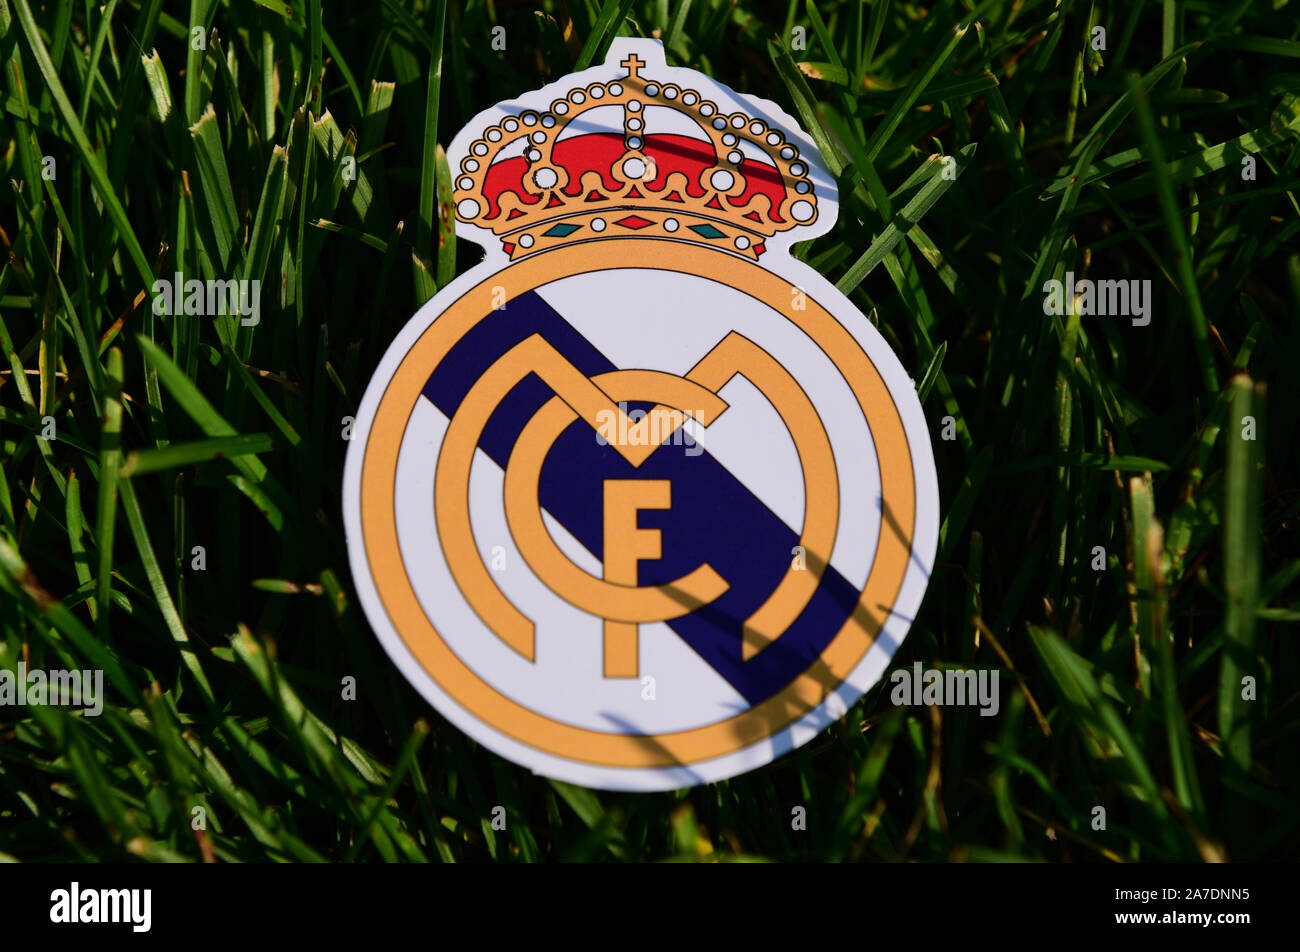 September 6, 2019 Istanbul, Turkey. The emblem of the Spanish football club Real Madrid on the green grass of the football field. Stock Photo